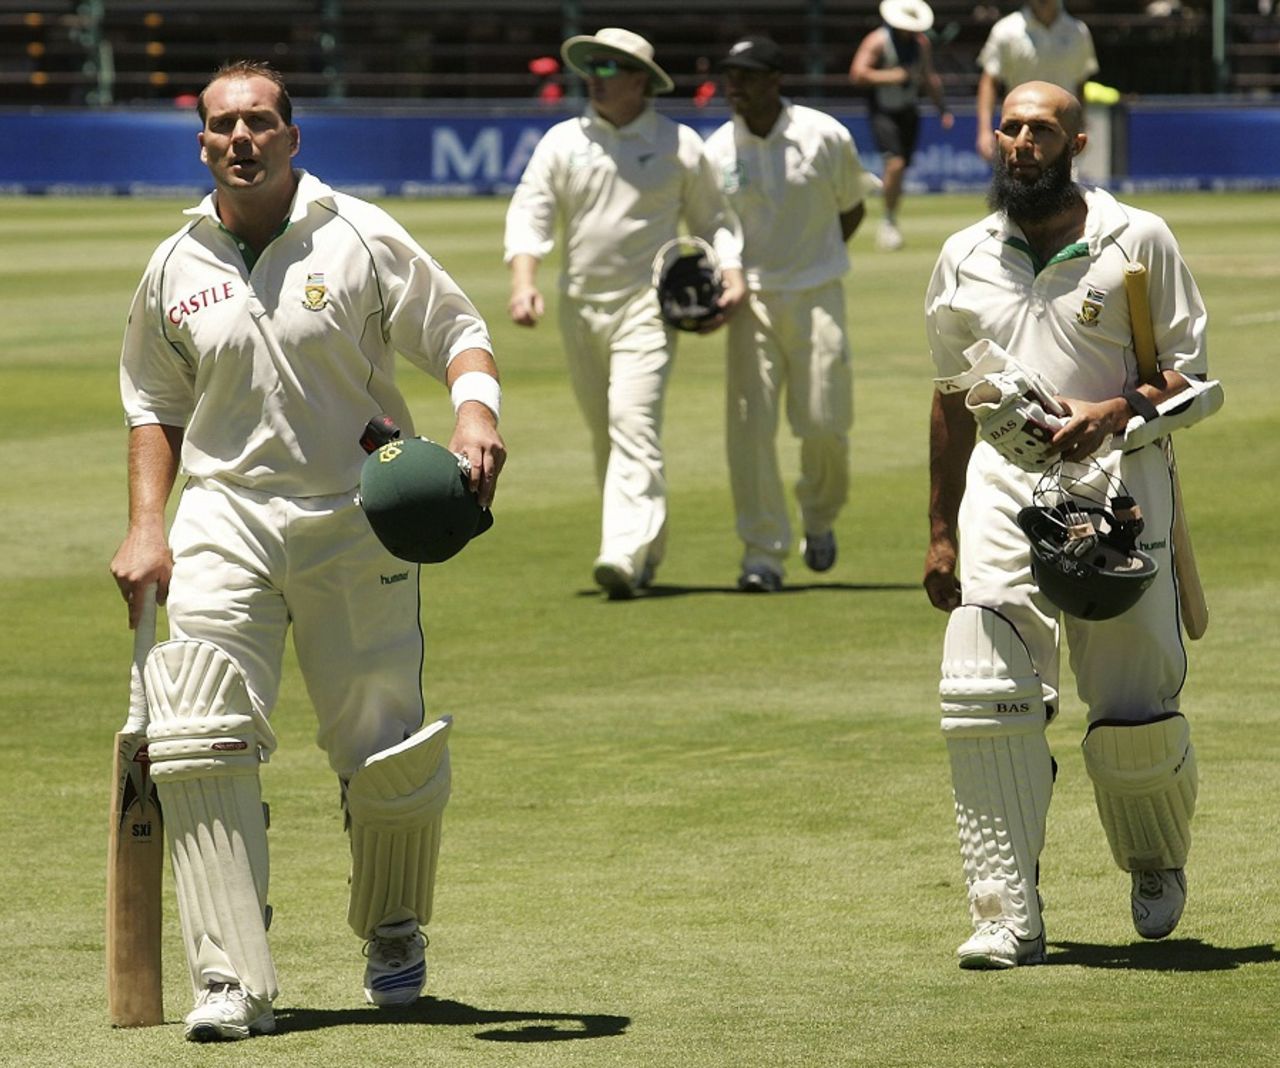 Jacques Kallis and Hashim Amla put on 330 runs for the third wicket, 1st Test, Johannesburg, 3rd day, November 10, 2007